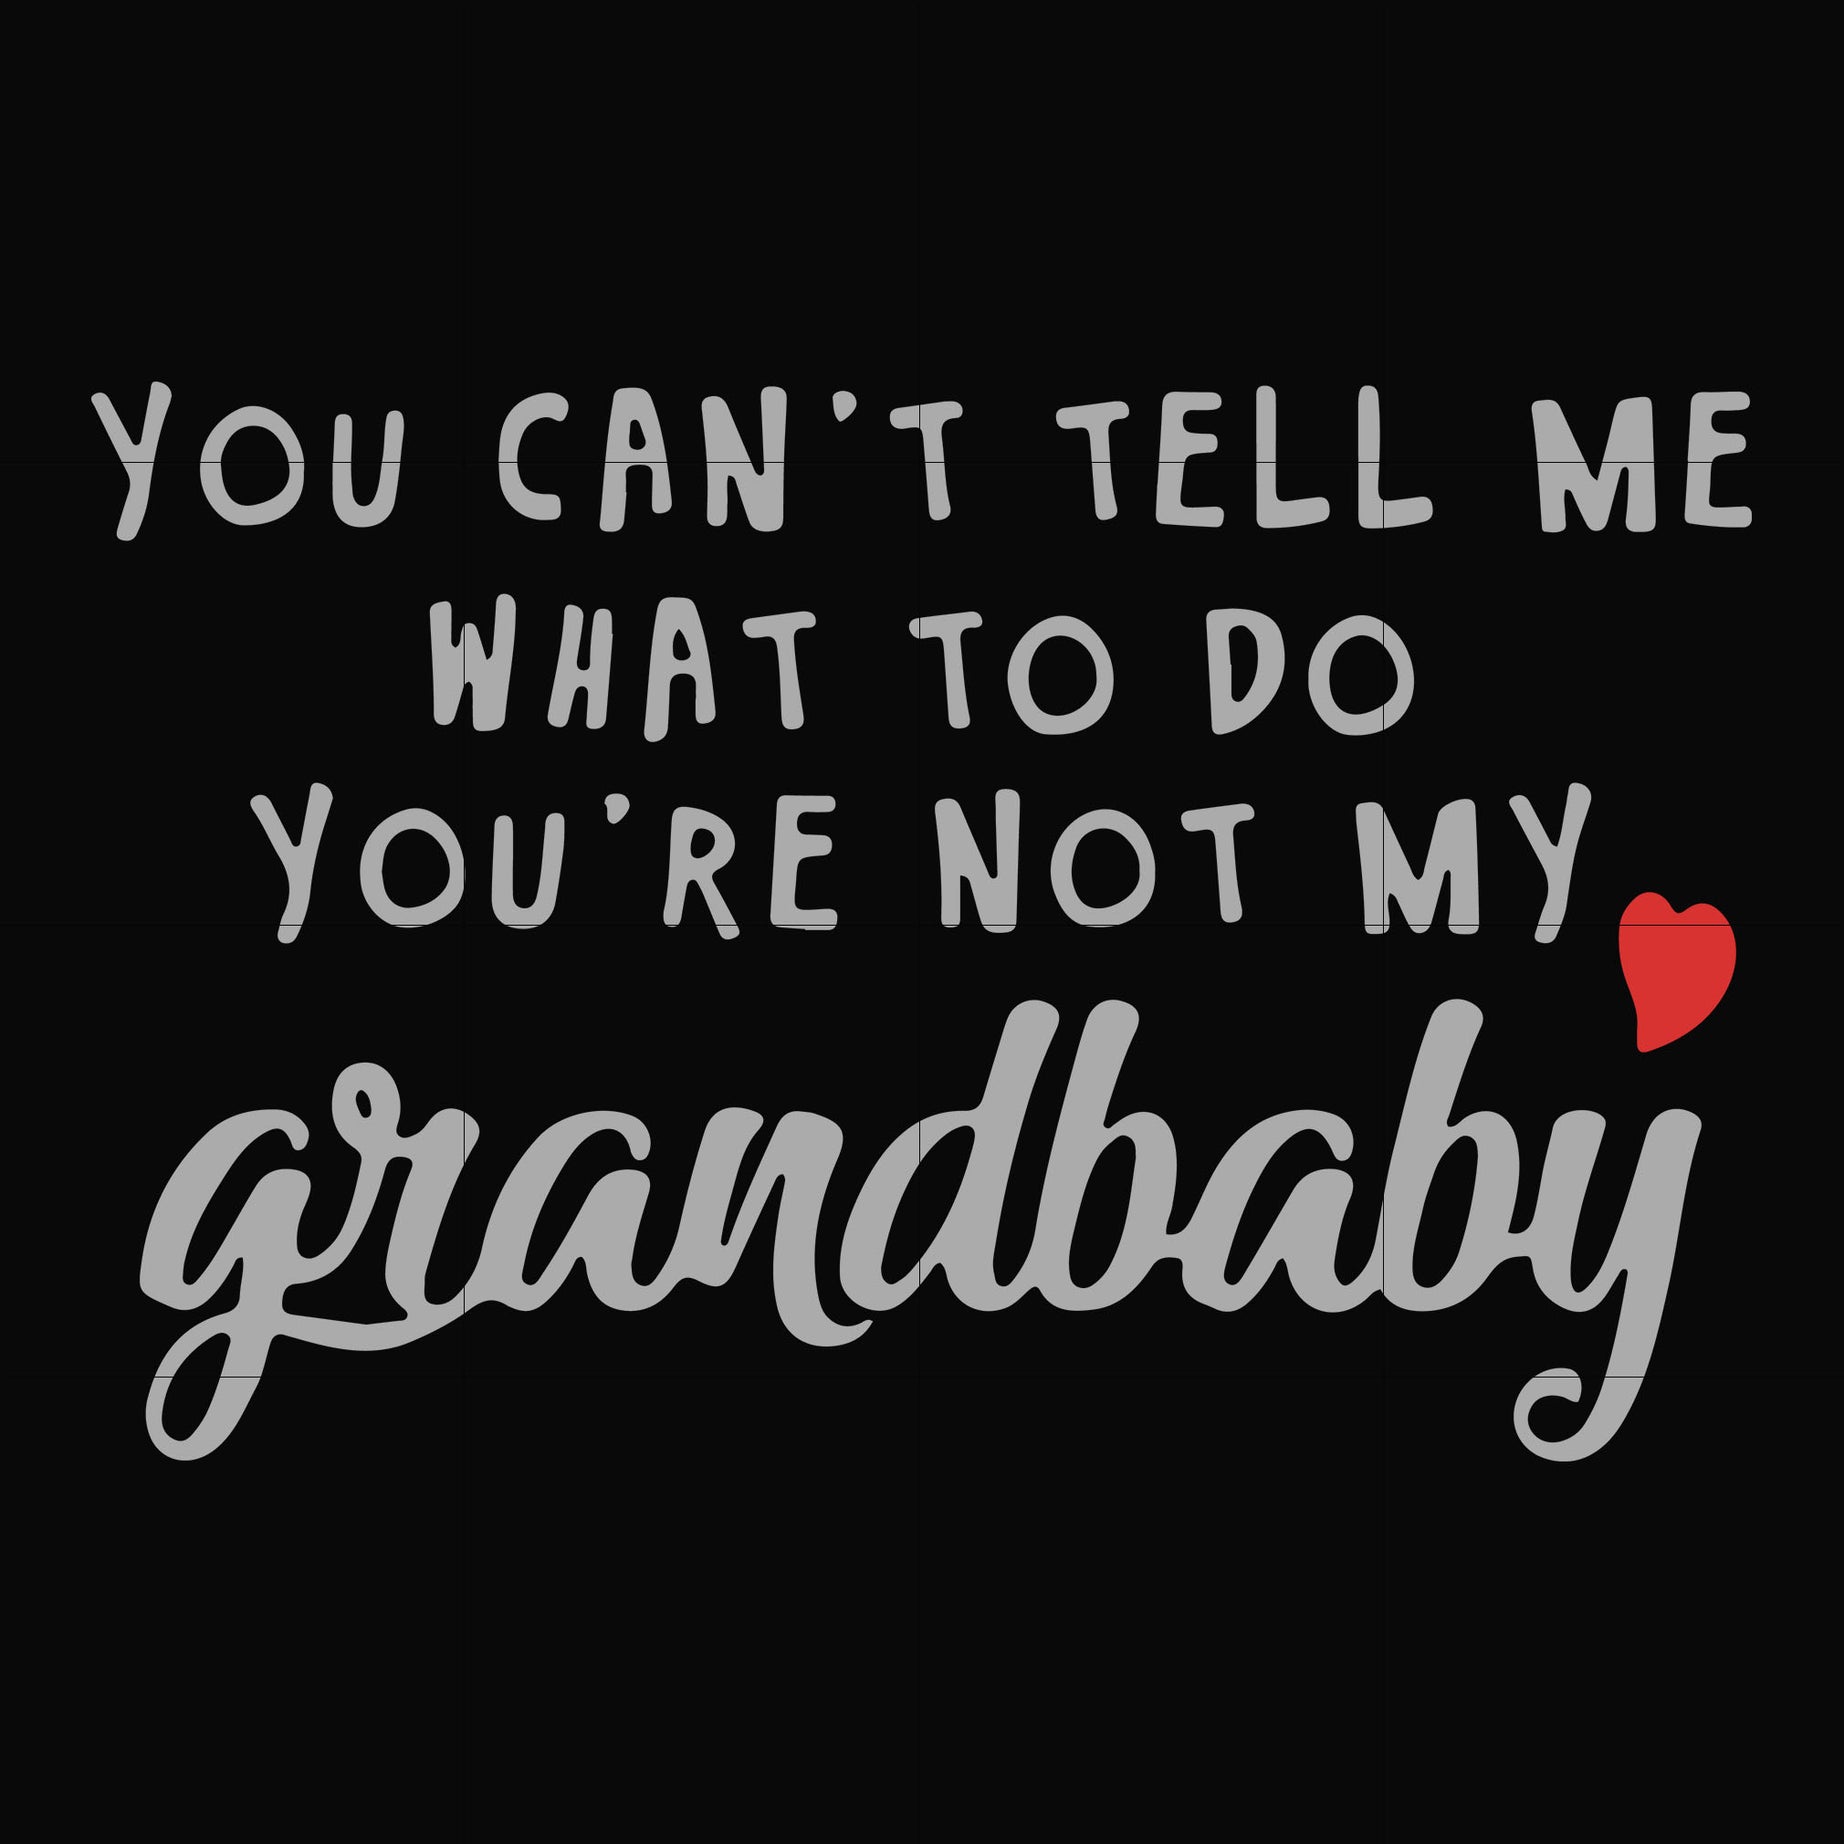 You can't tell me want to do you're not my grandbaby svg, png, dxf, eps file FN000935